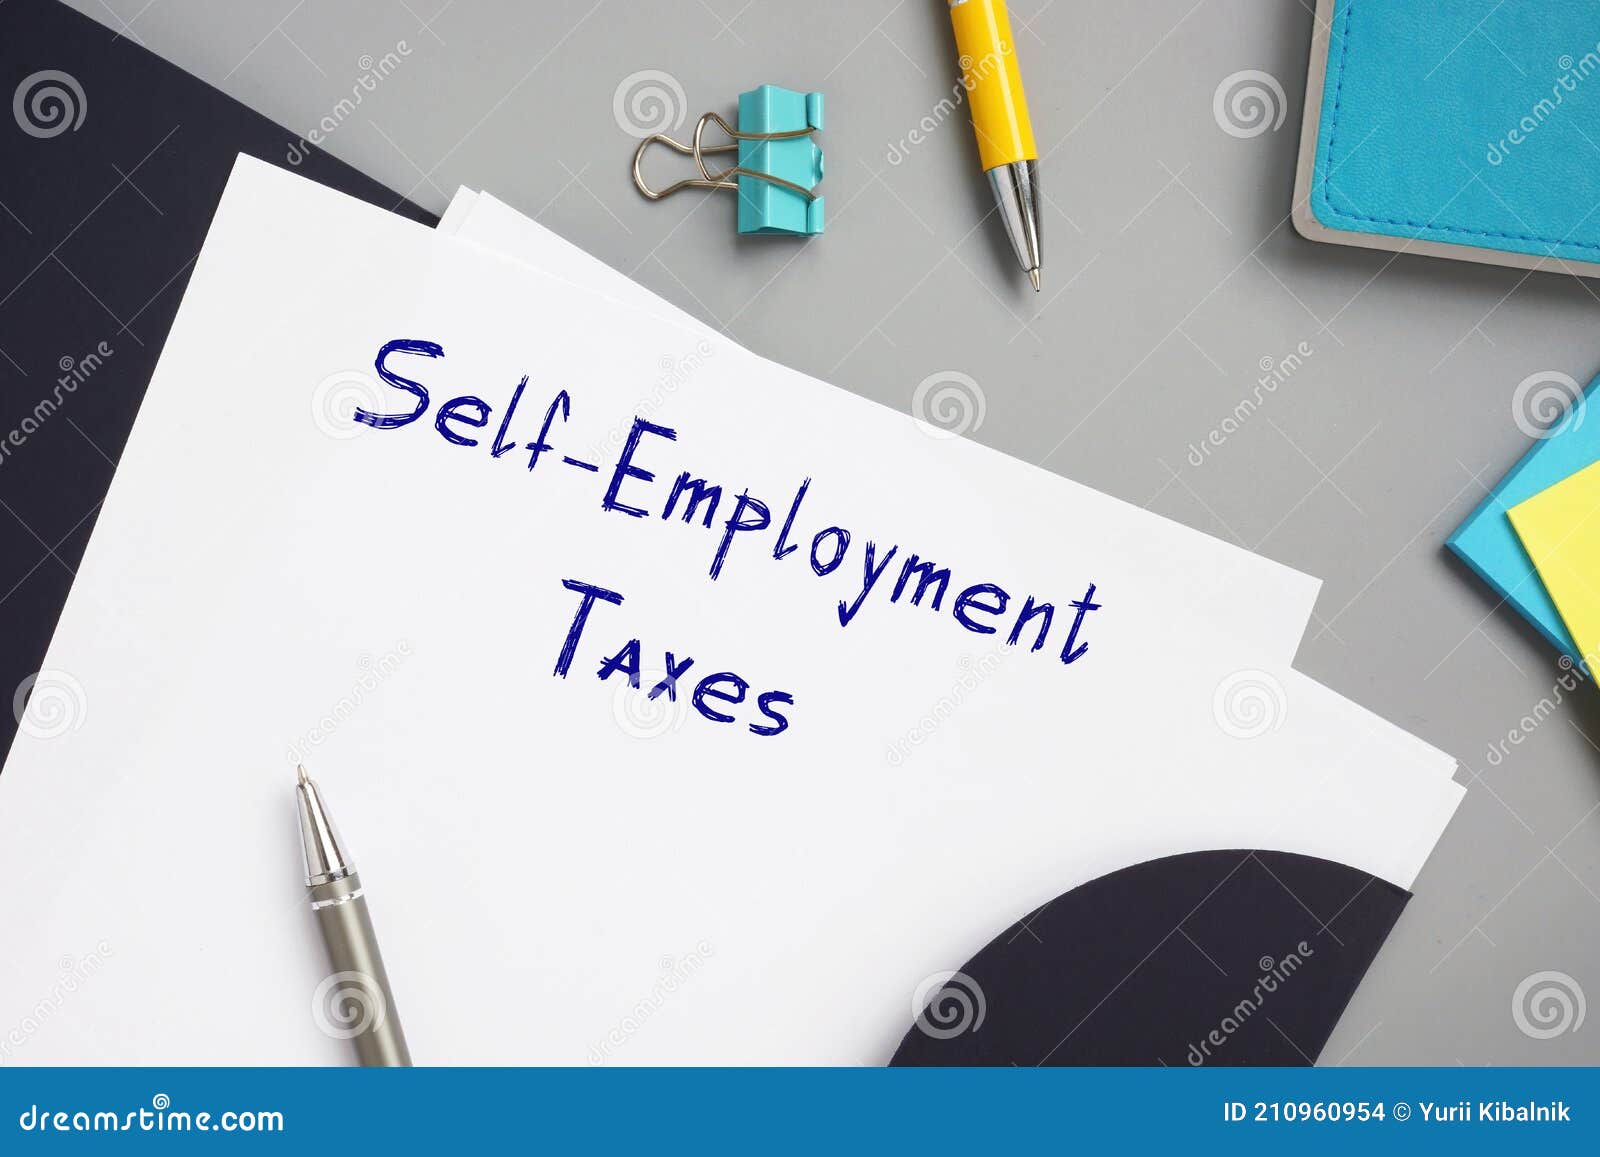 juridical concept meaning self-employment taxes with inscription on the sheet